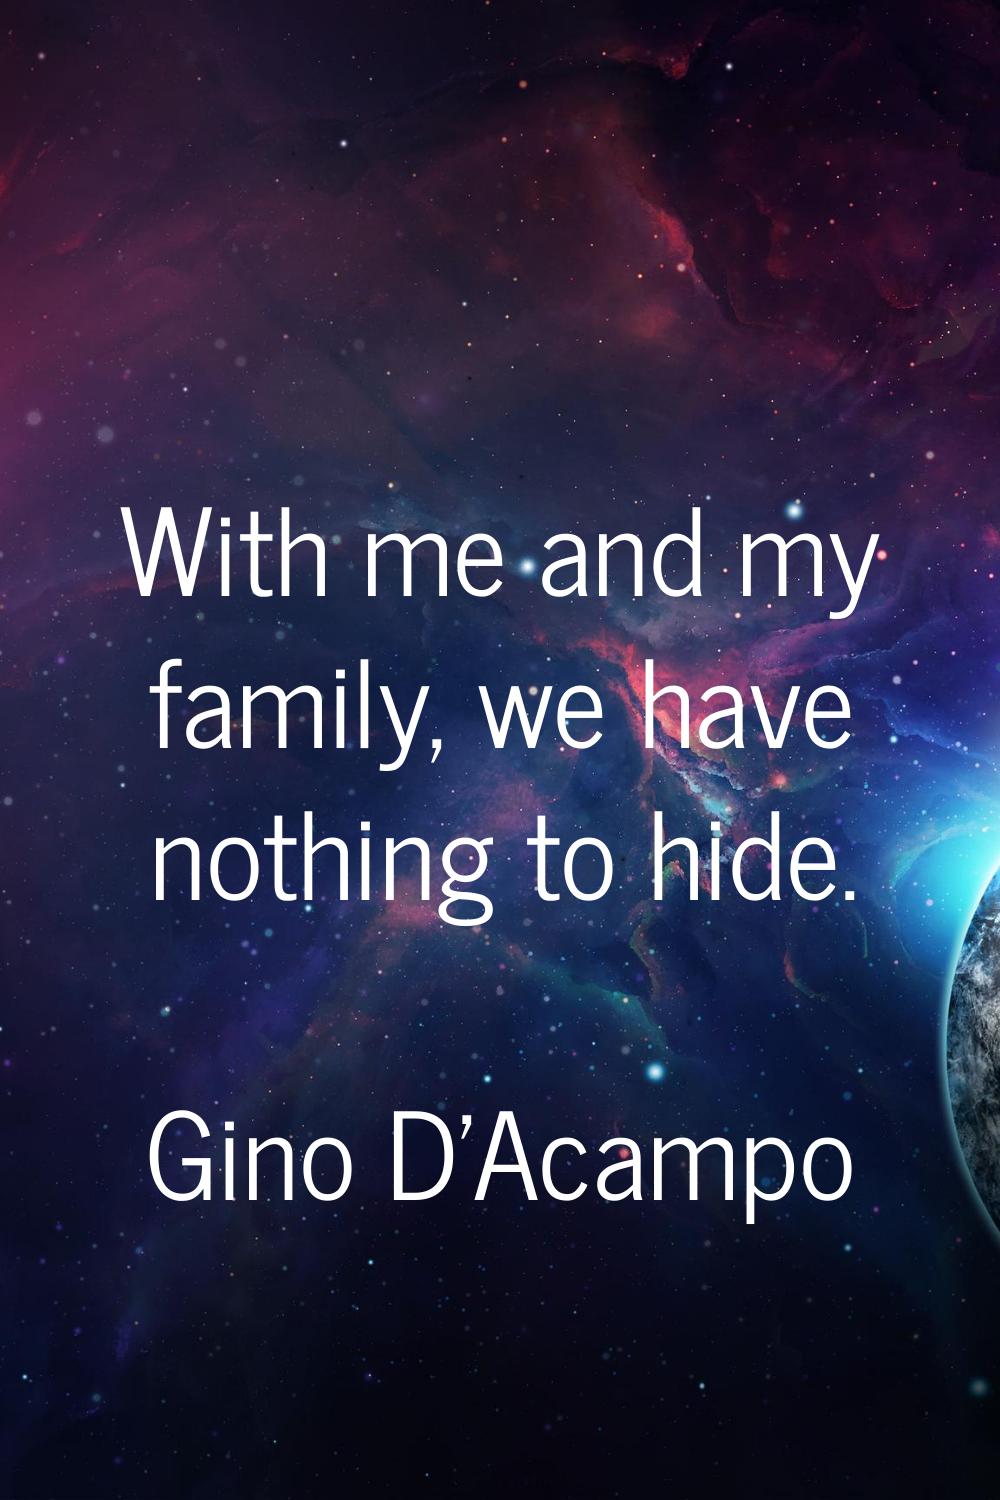 With me and my family, we have nothing to hide.